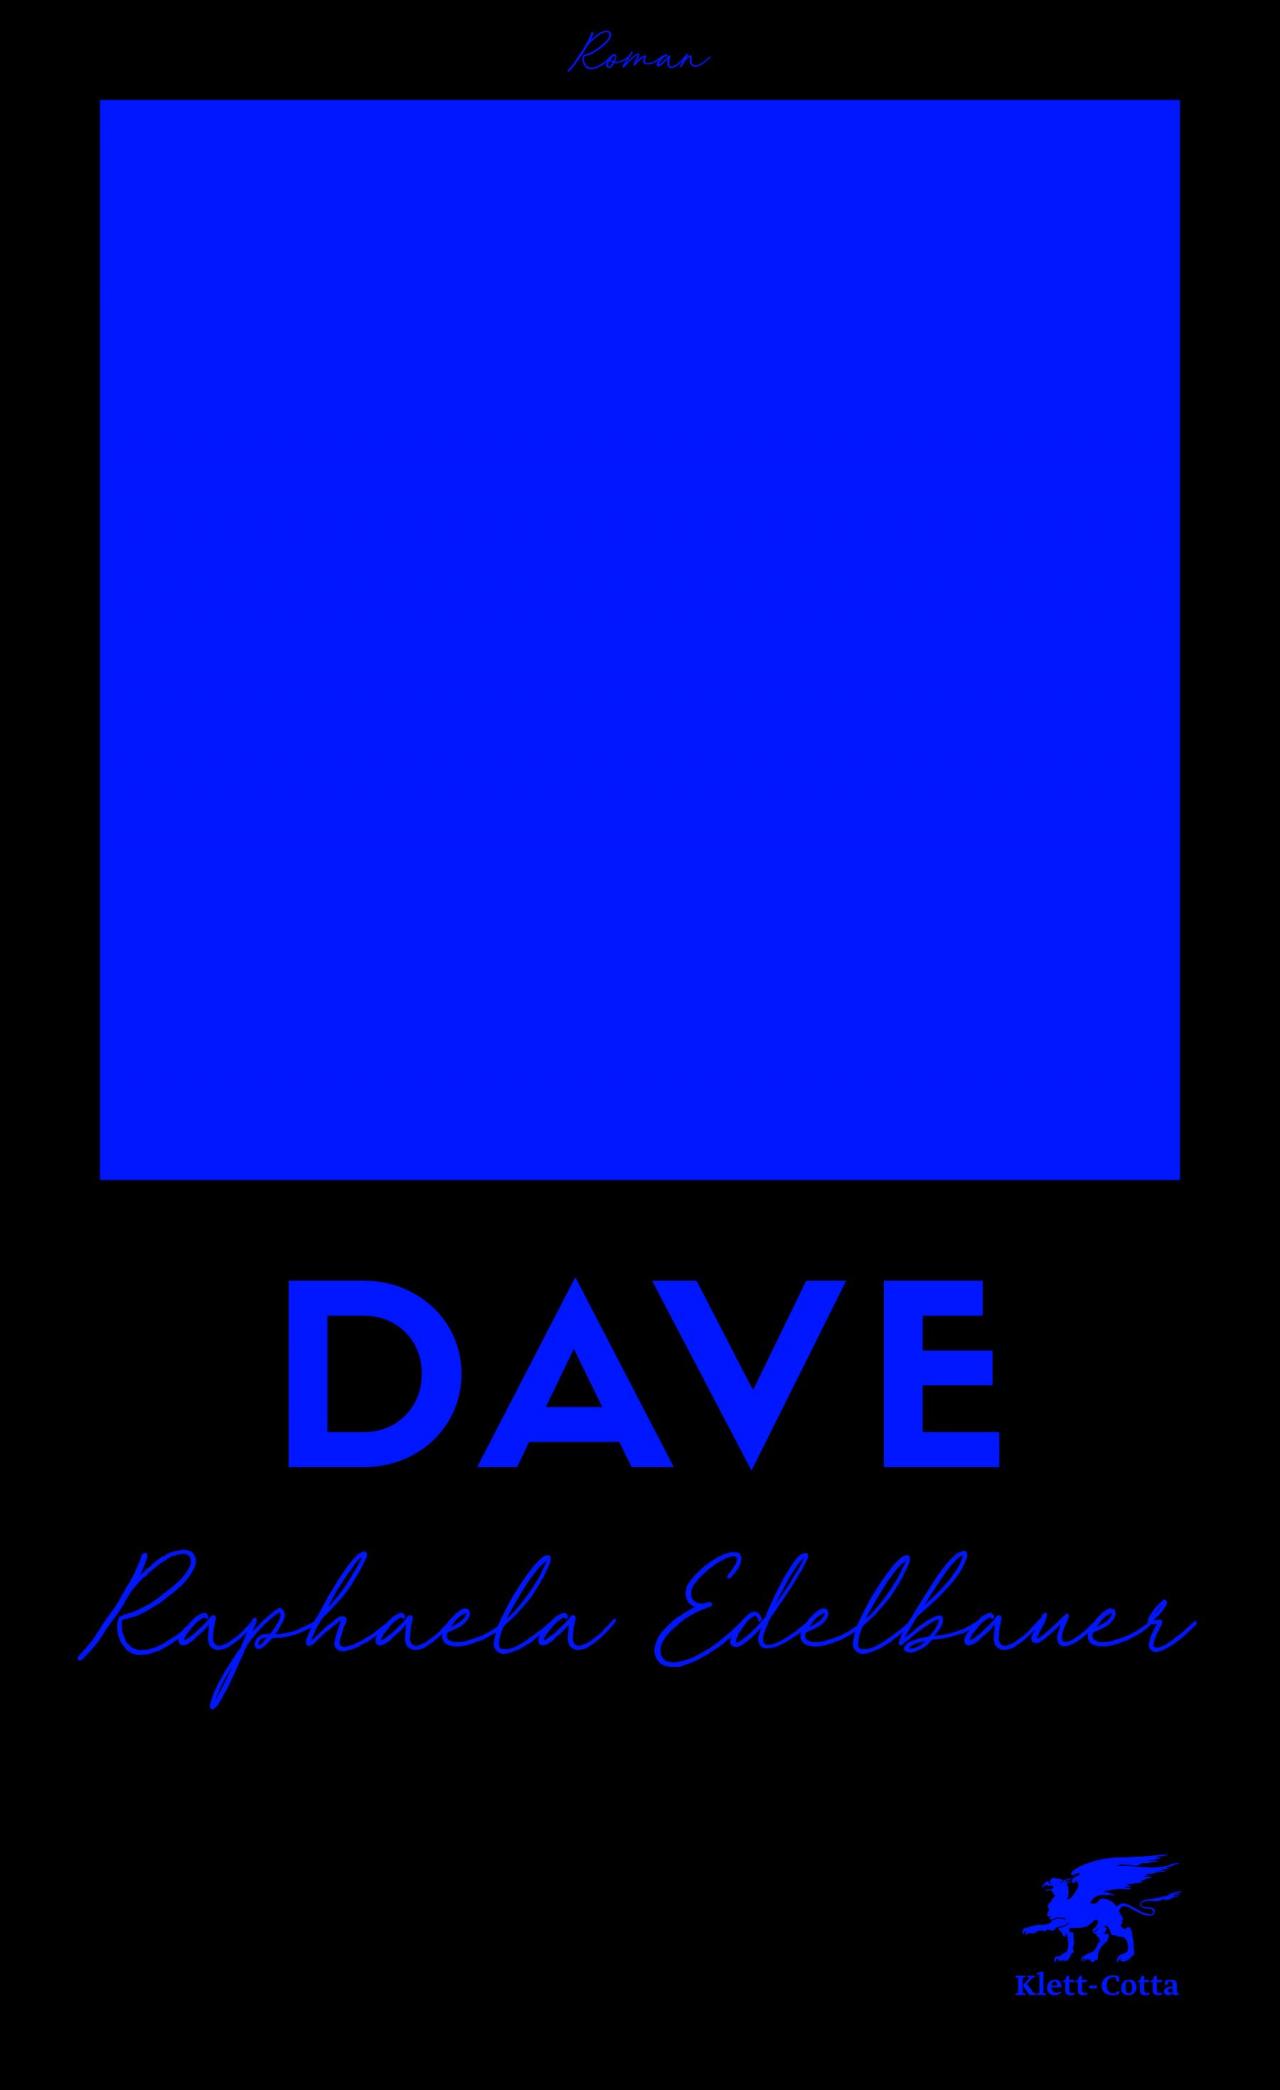 Cover of the novel »Dave« by Raphaela Edelbauer in black and purple